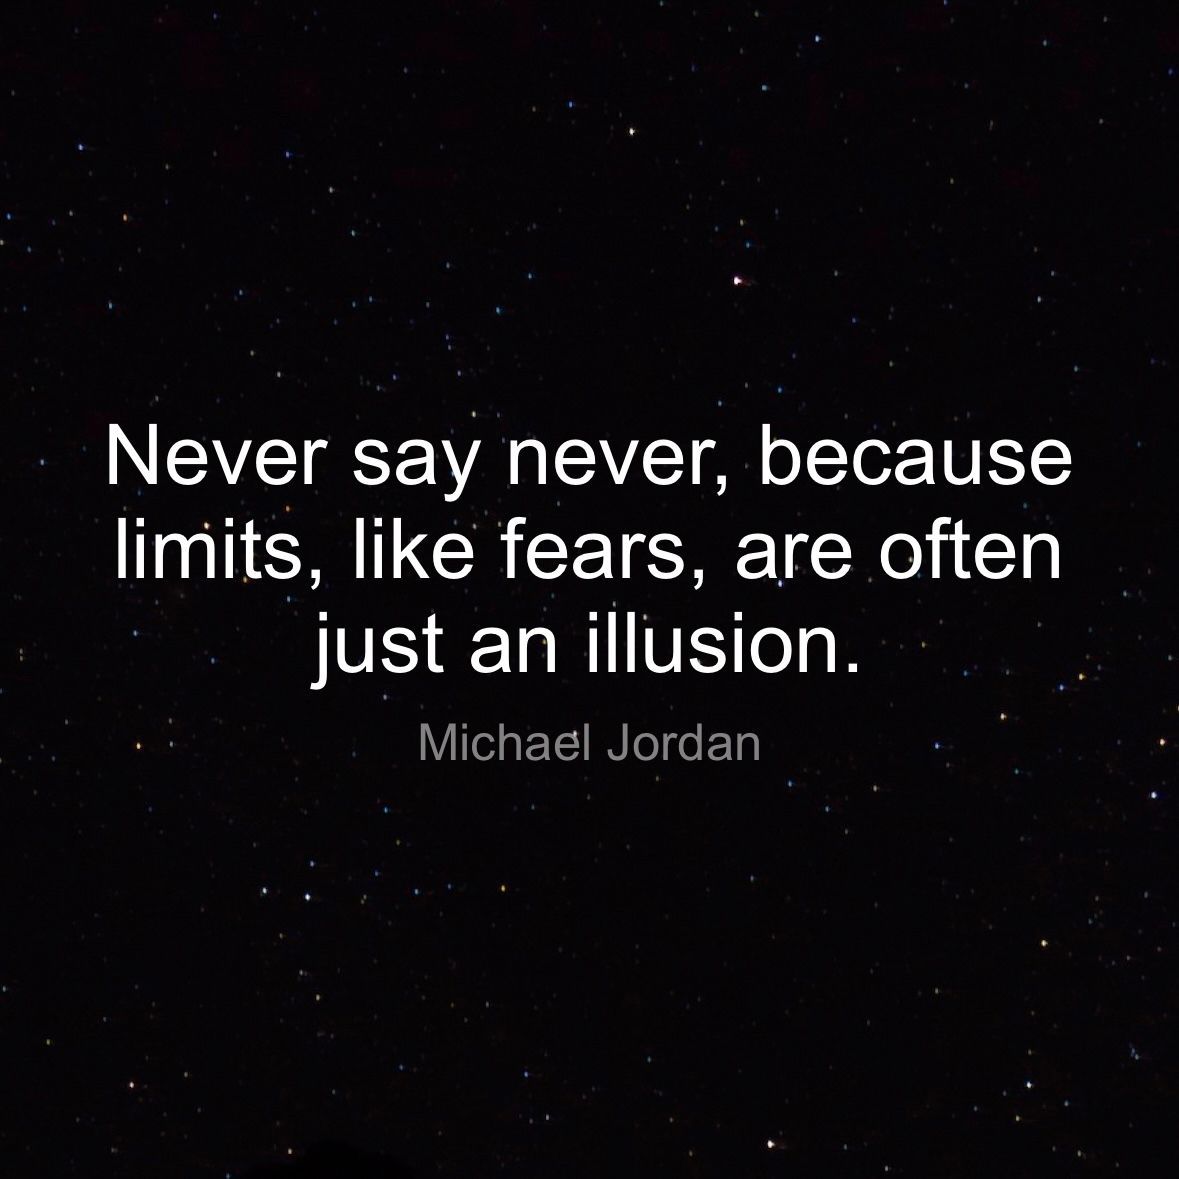 Never say never, because limits, like fears, are often just an illusion. - Michael Jordan via instil.app/q/g778xEM7G3

#success #successquotes #successmindset #successquote #mindsetiseverything #mindset